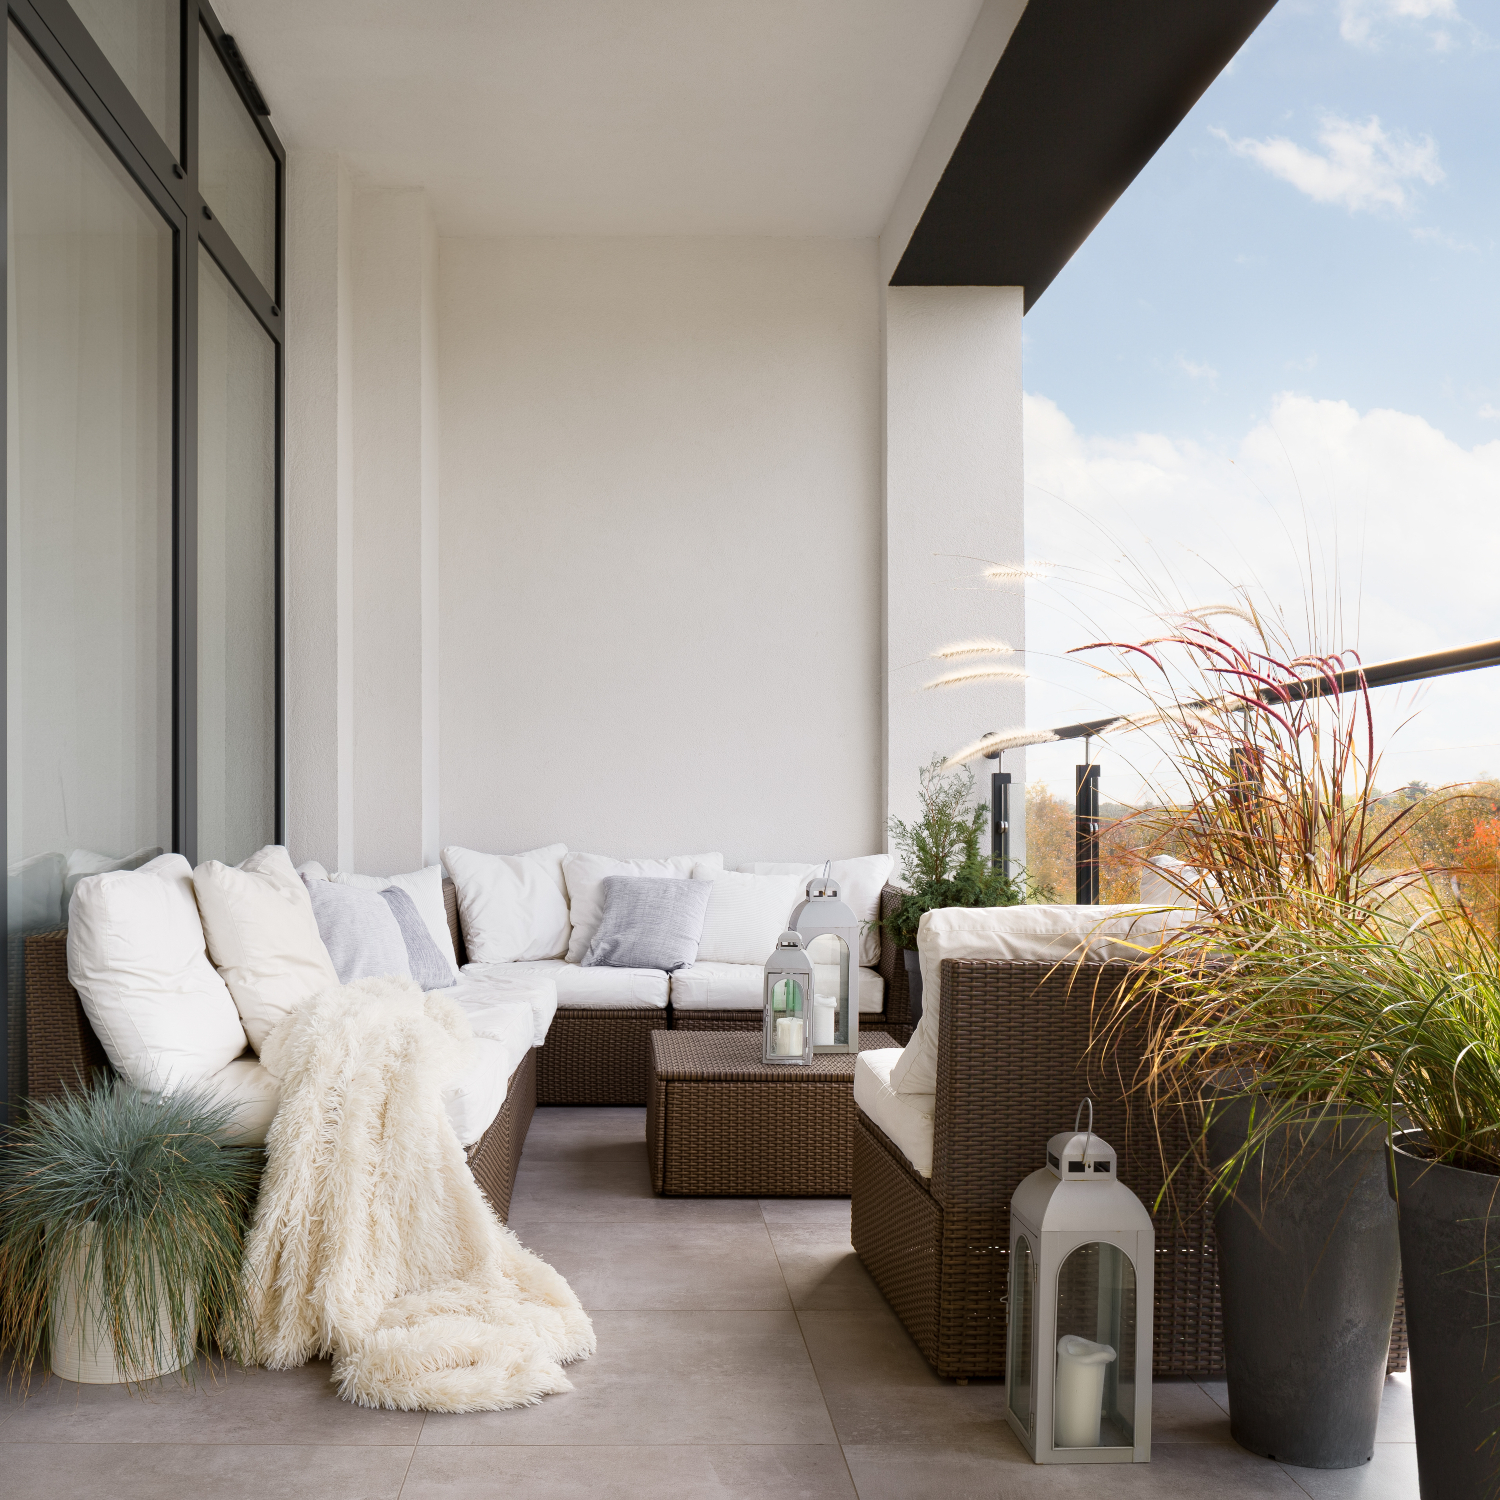 Outdoor balcony with furniture and plants